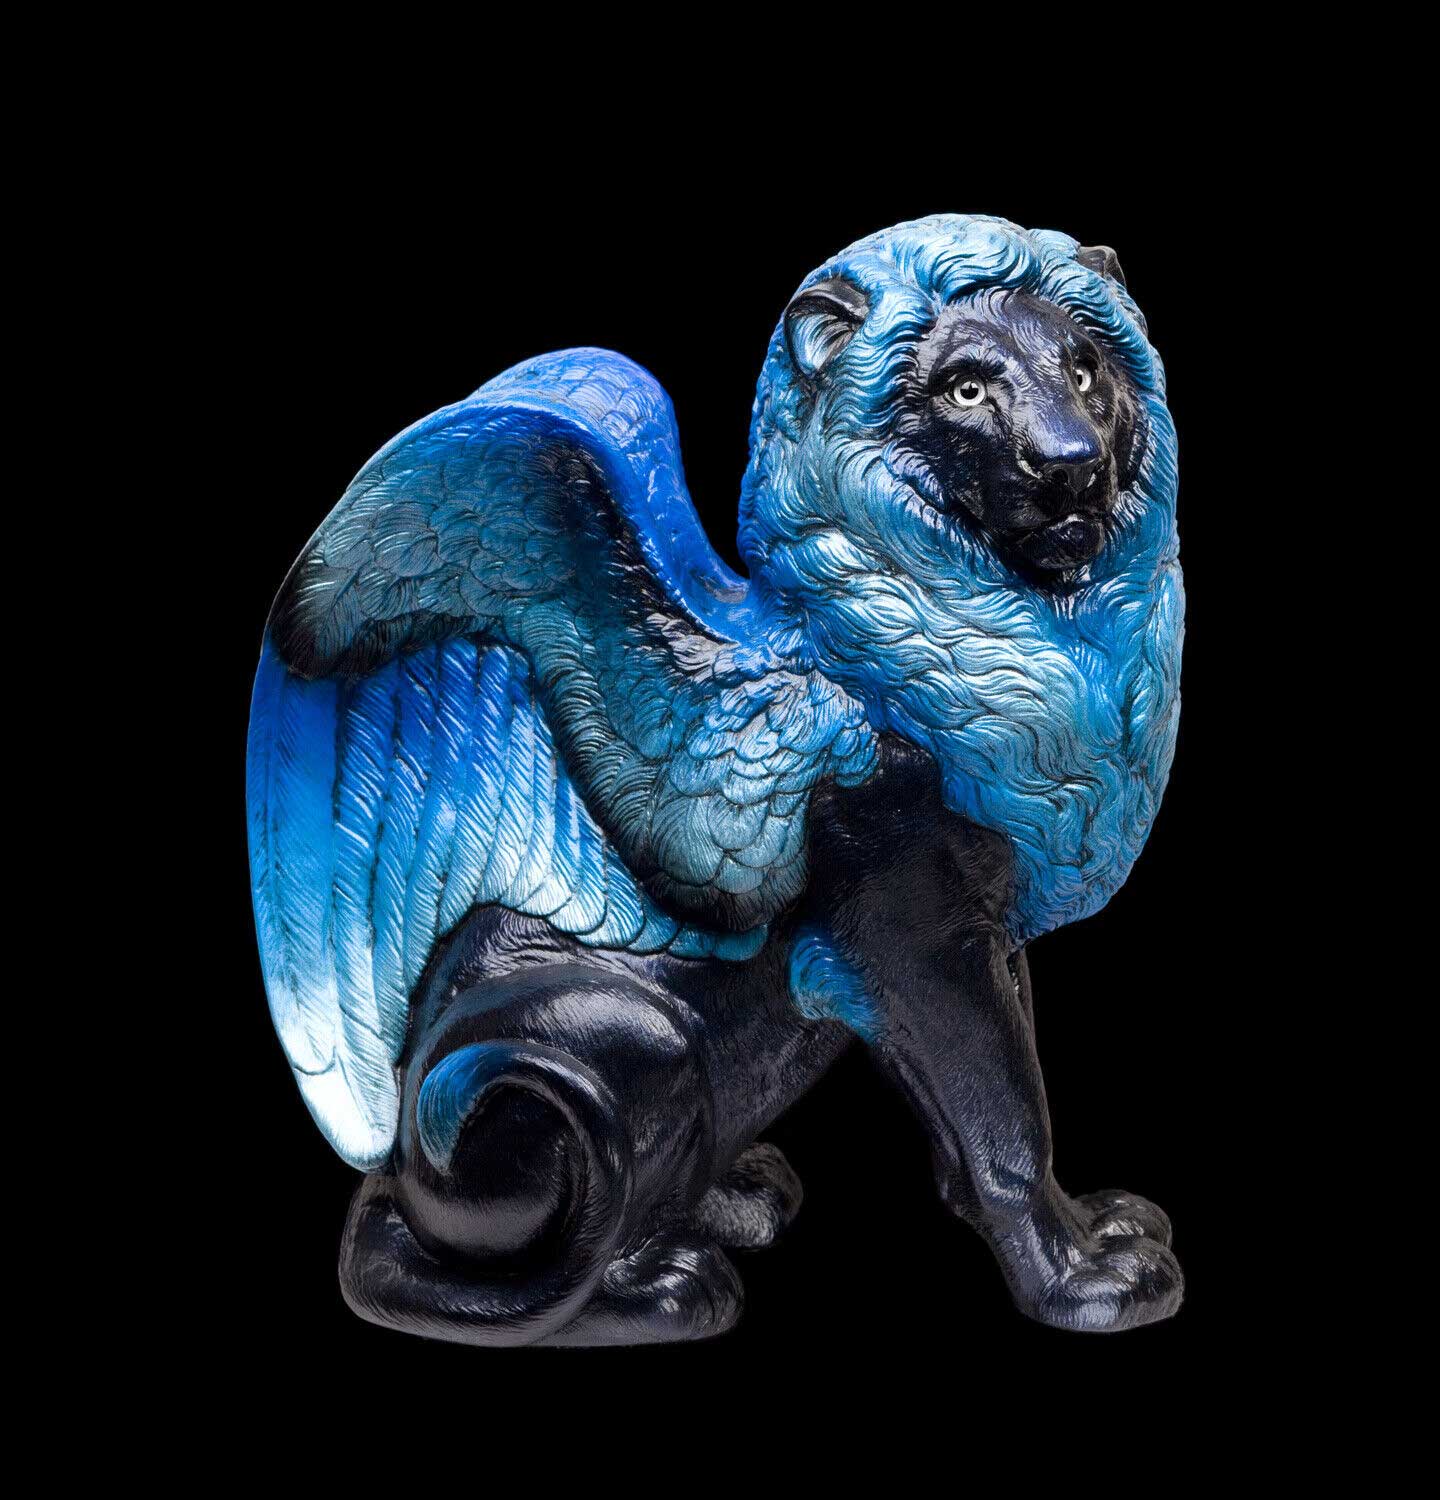 20220812-Twilight-Sapphire-Winged-Lion-Test-Paint-1-by-Gina